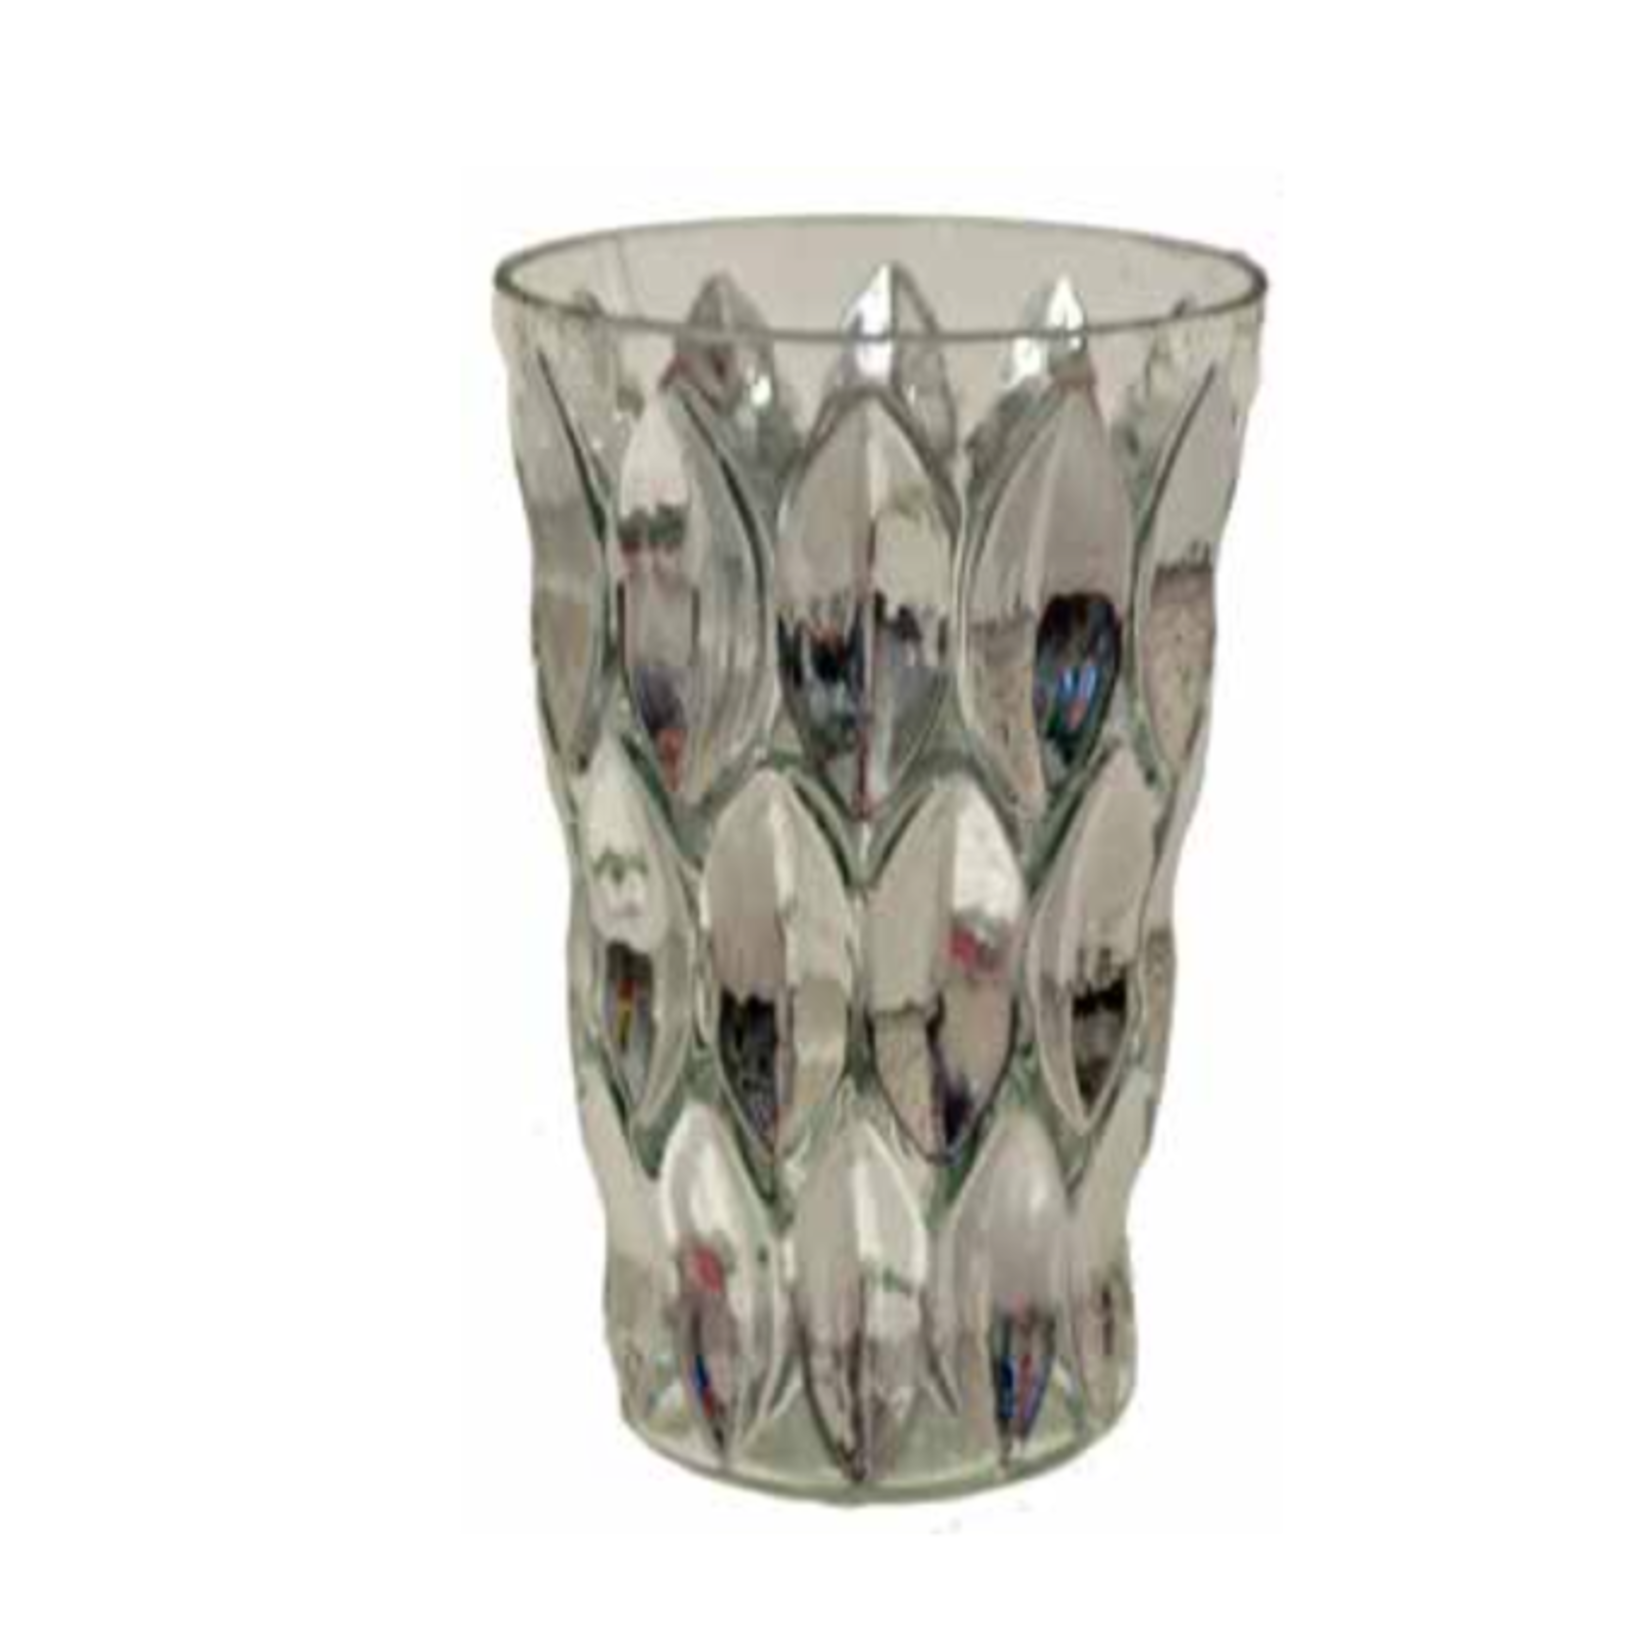 50% off was $3.99 now $1.99.  4.25”H X 2.5” SILVER REFLECTION VOTIVE